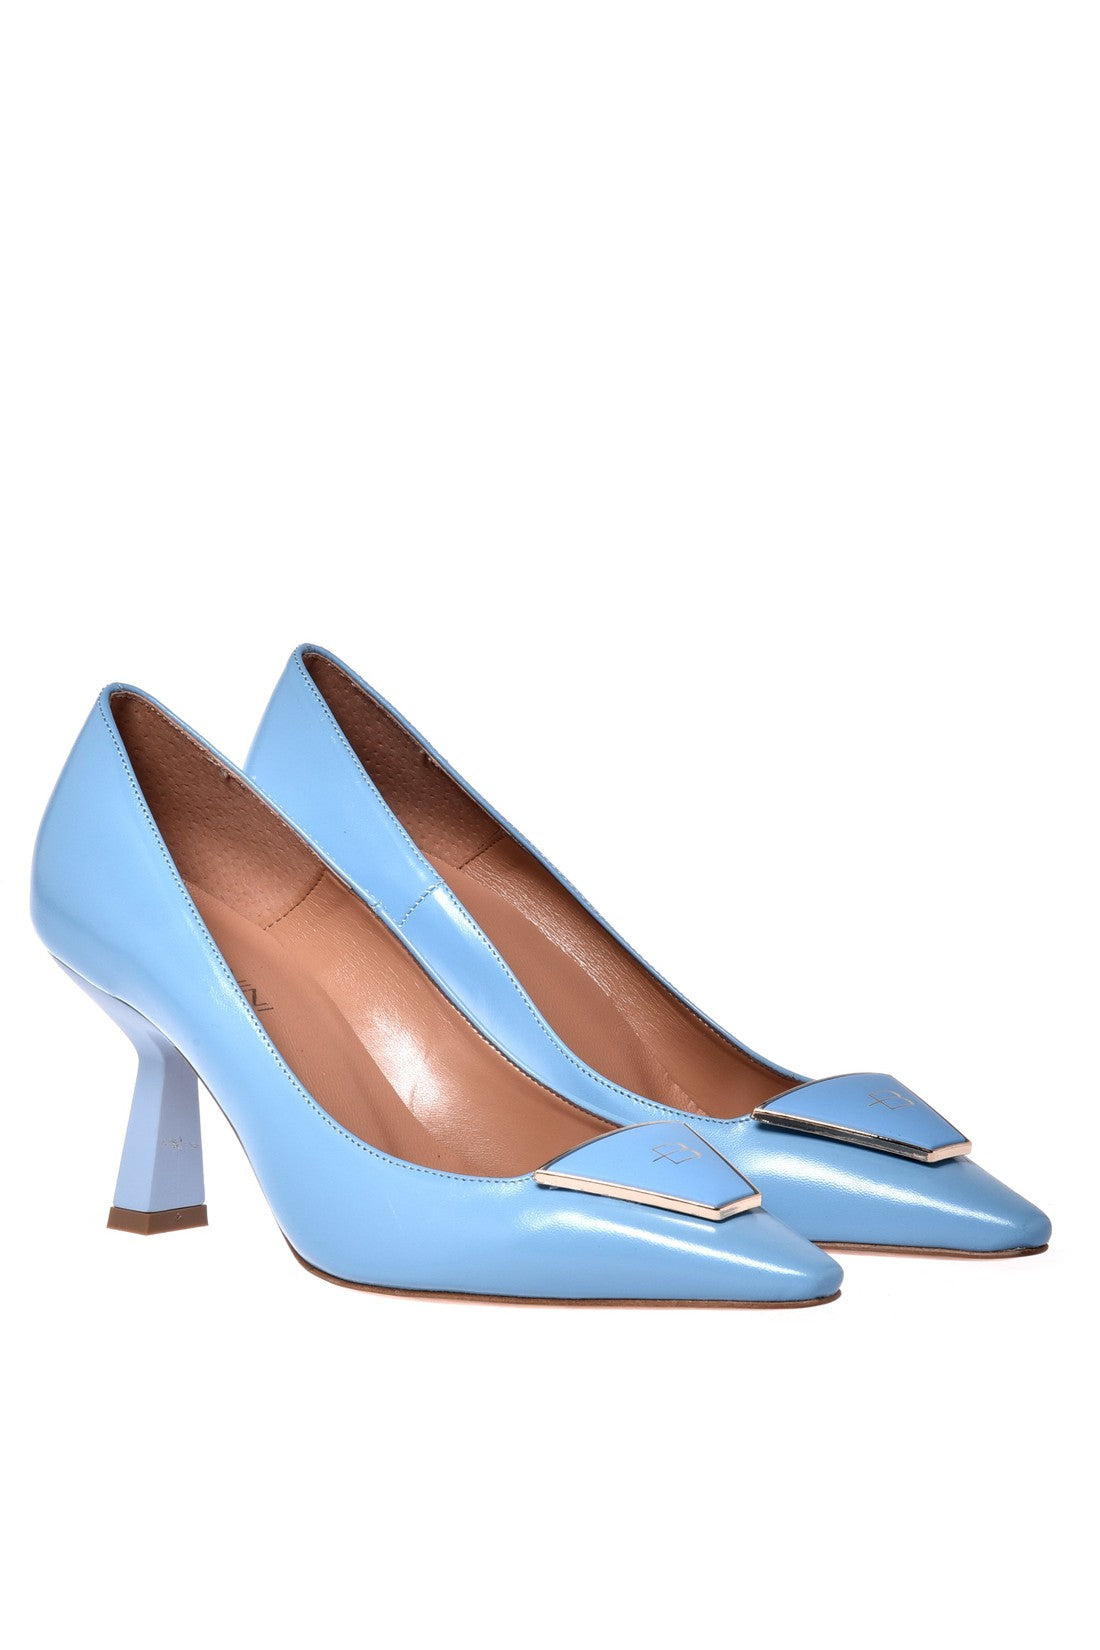 Court shoe in blue nappa leather